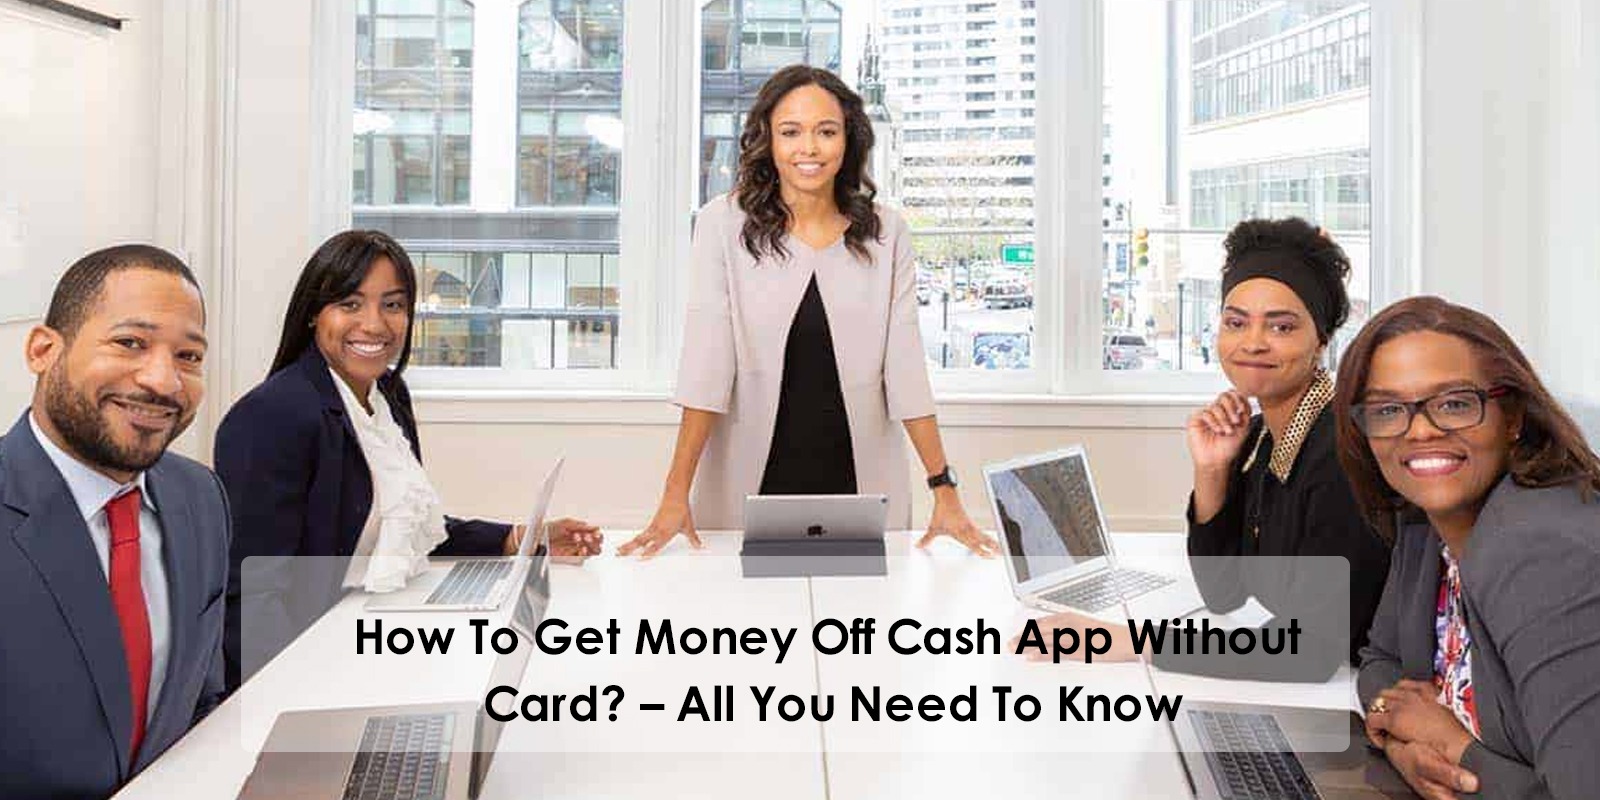 How To Get Money Off Cash App Without Card? - All You Need To Know